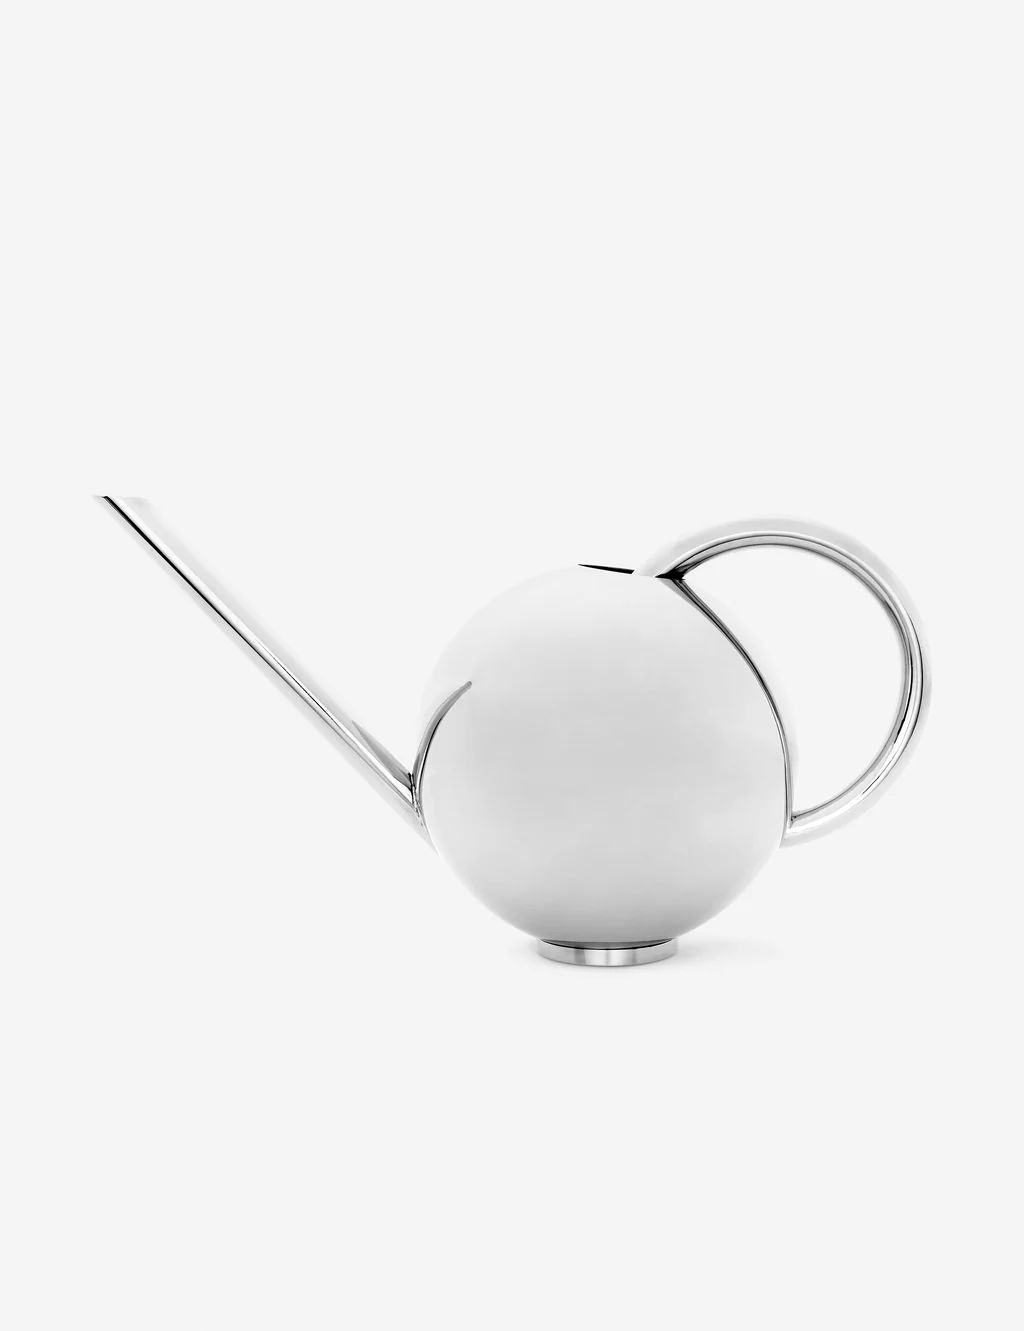 Orb Watering Can by Ferm Living | Lulu and Georgia 